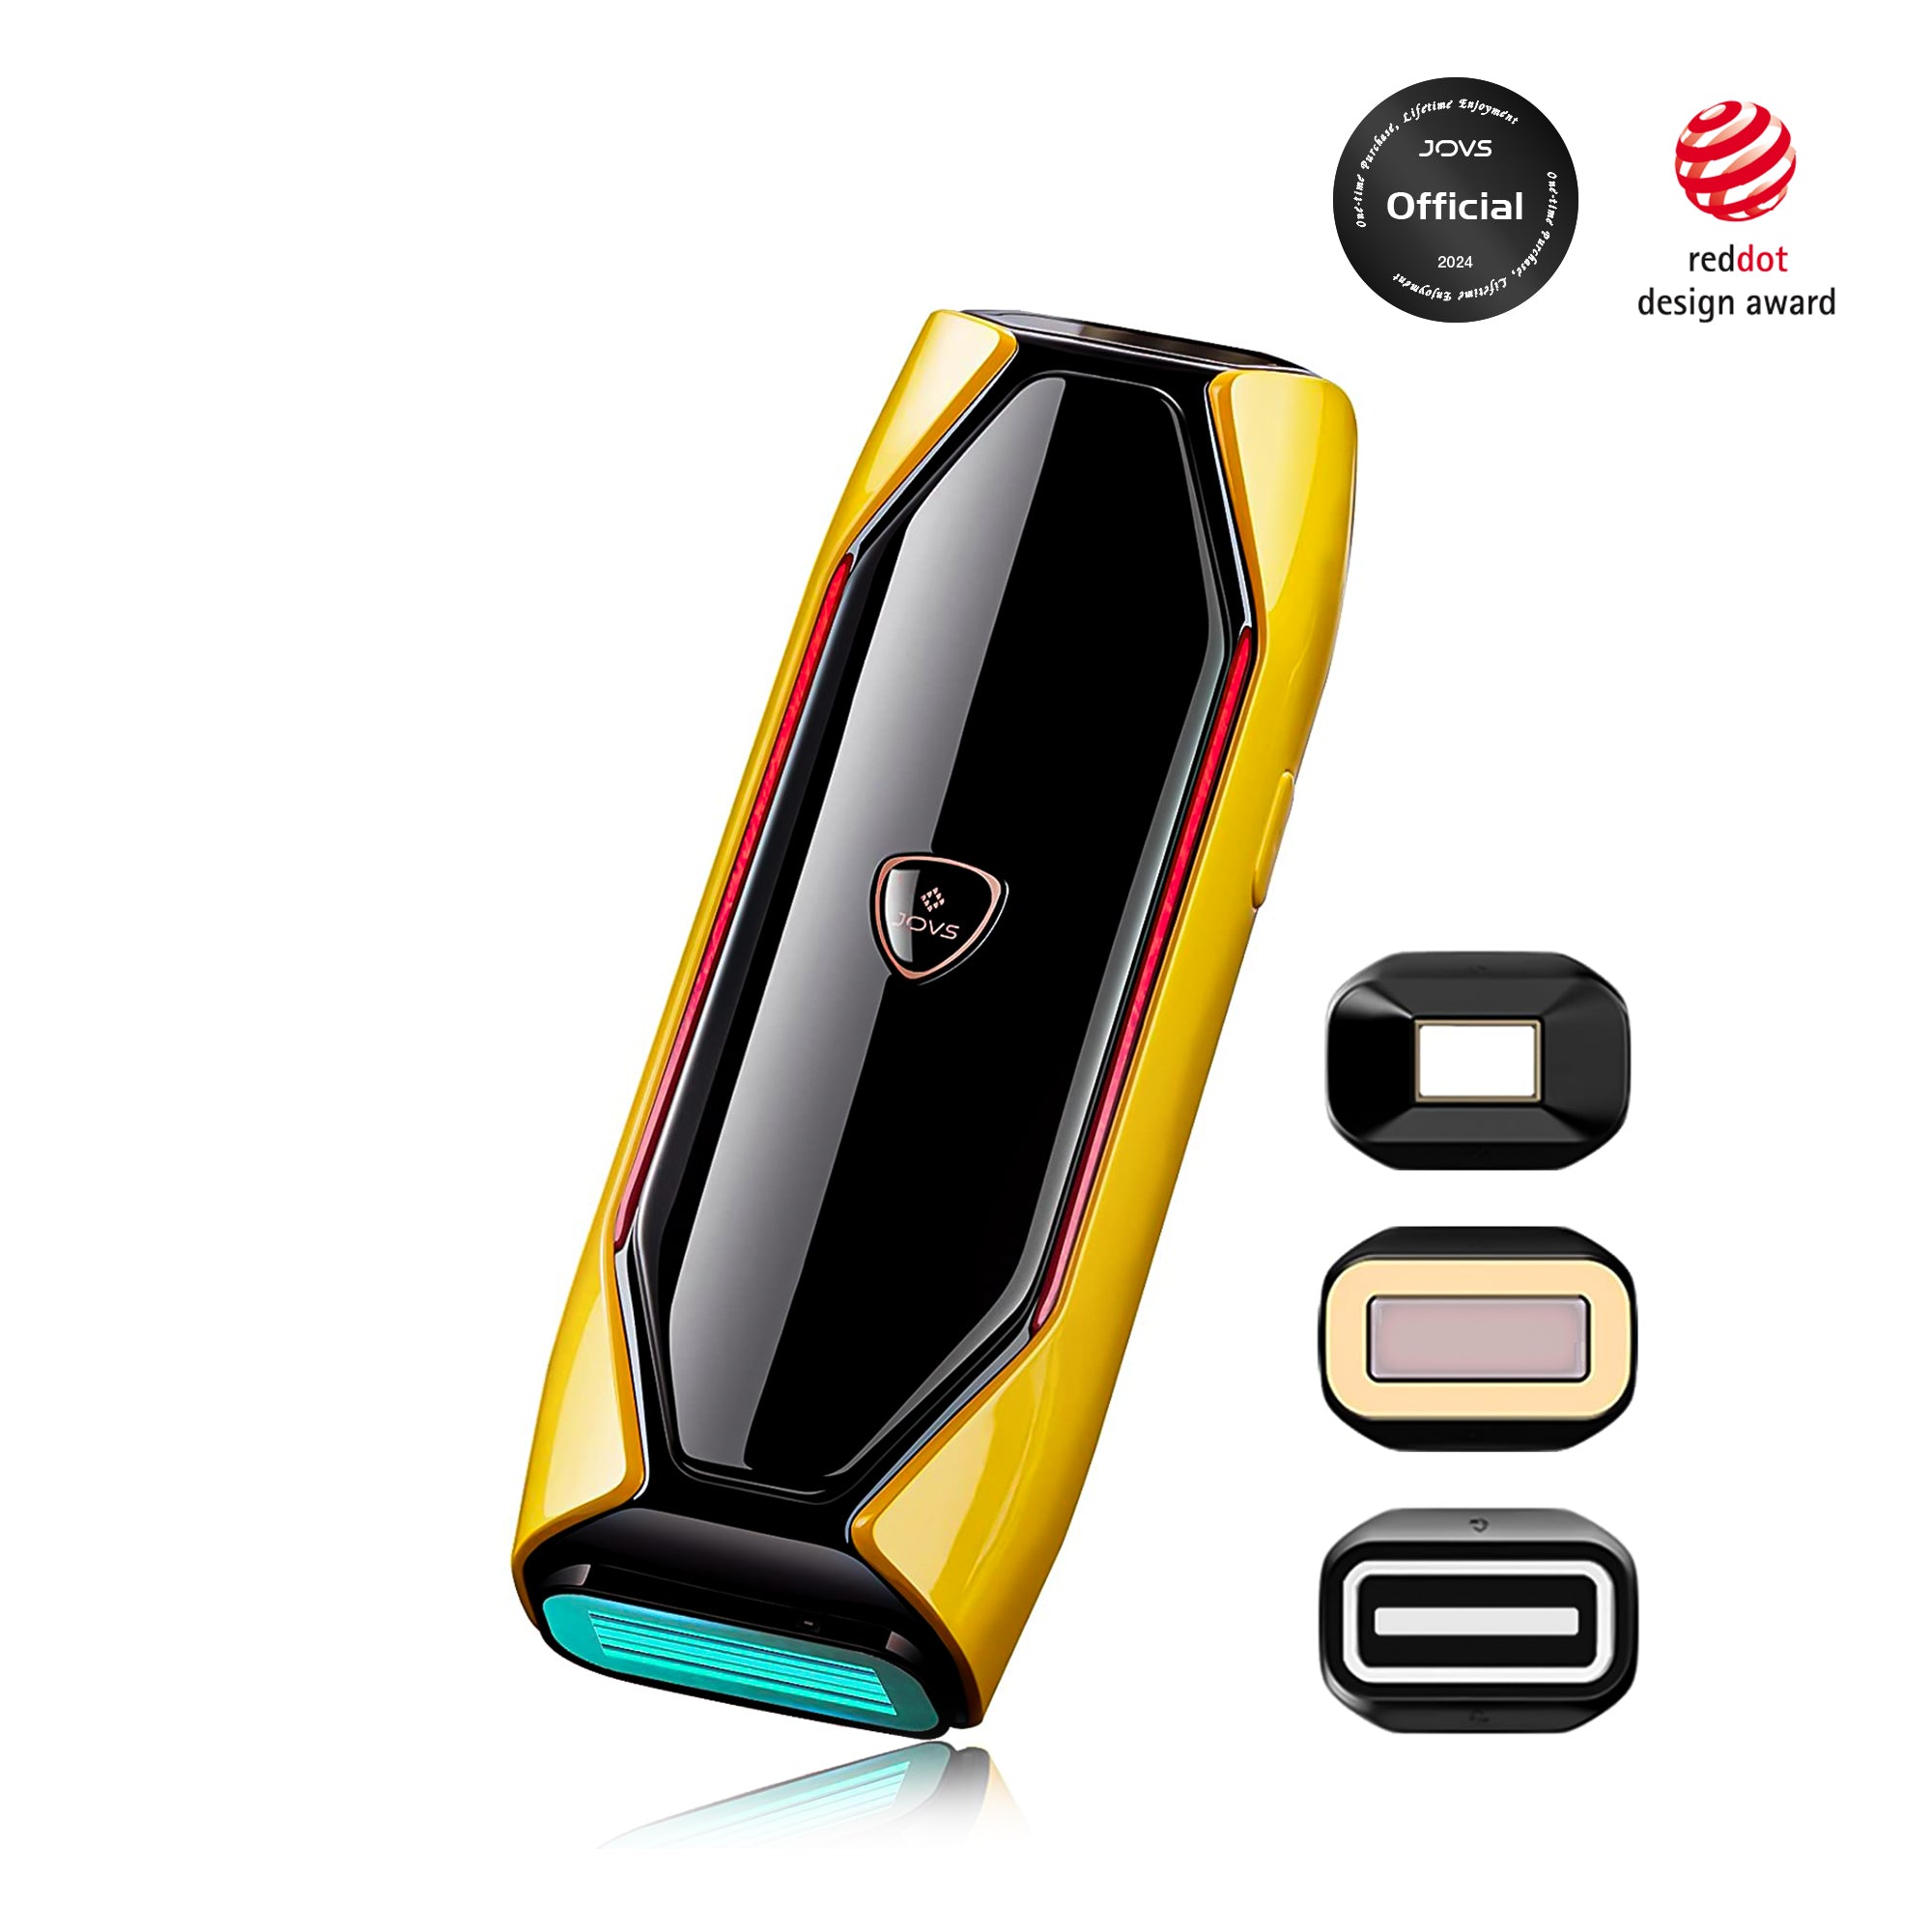 JOVS X™ 3-in-1 IPL Hair Removal Device